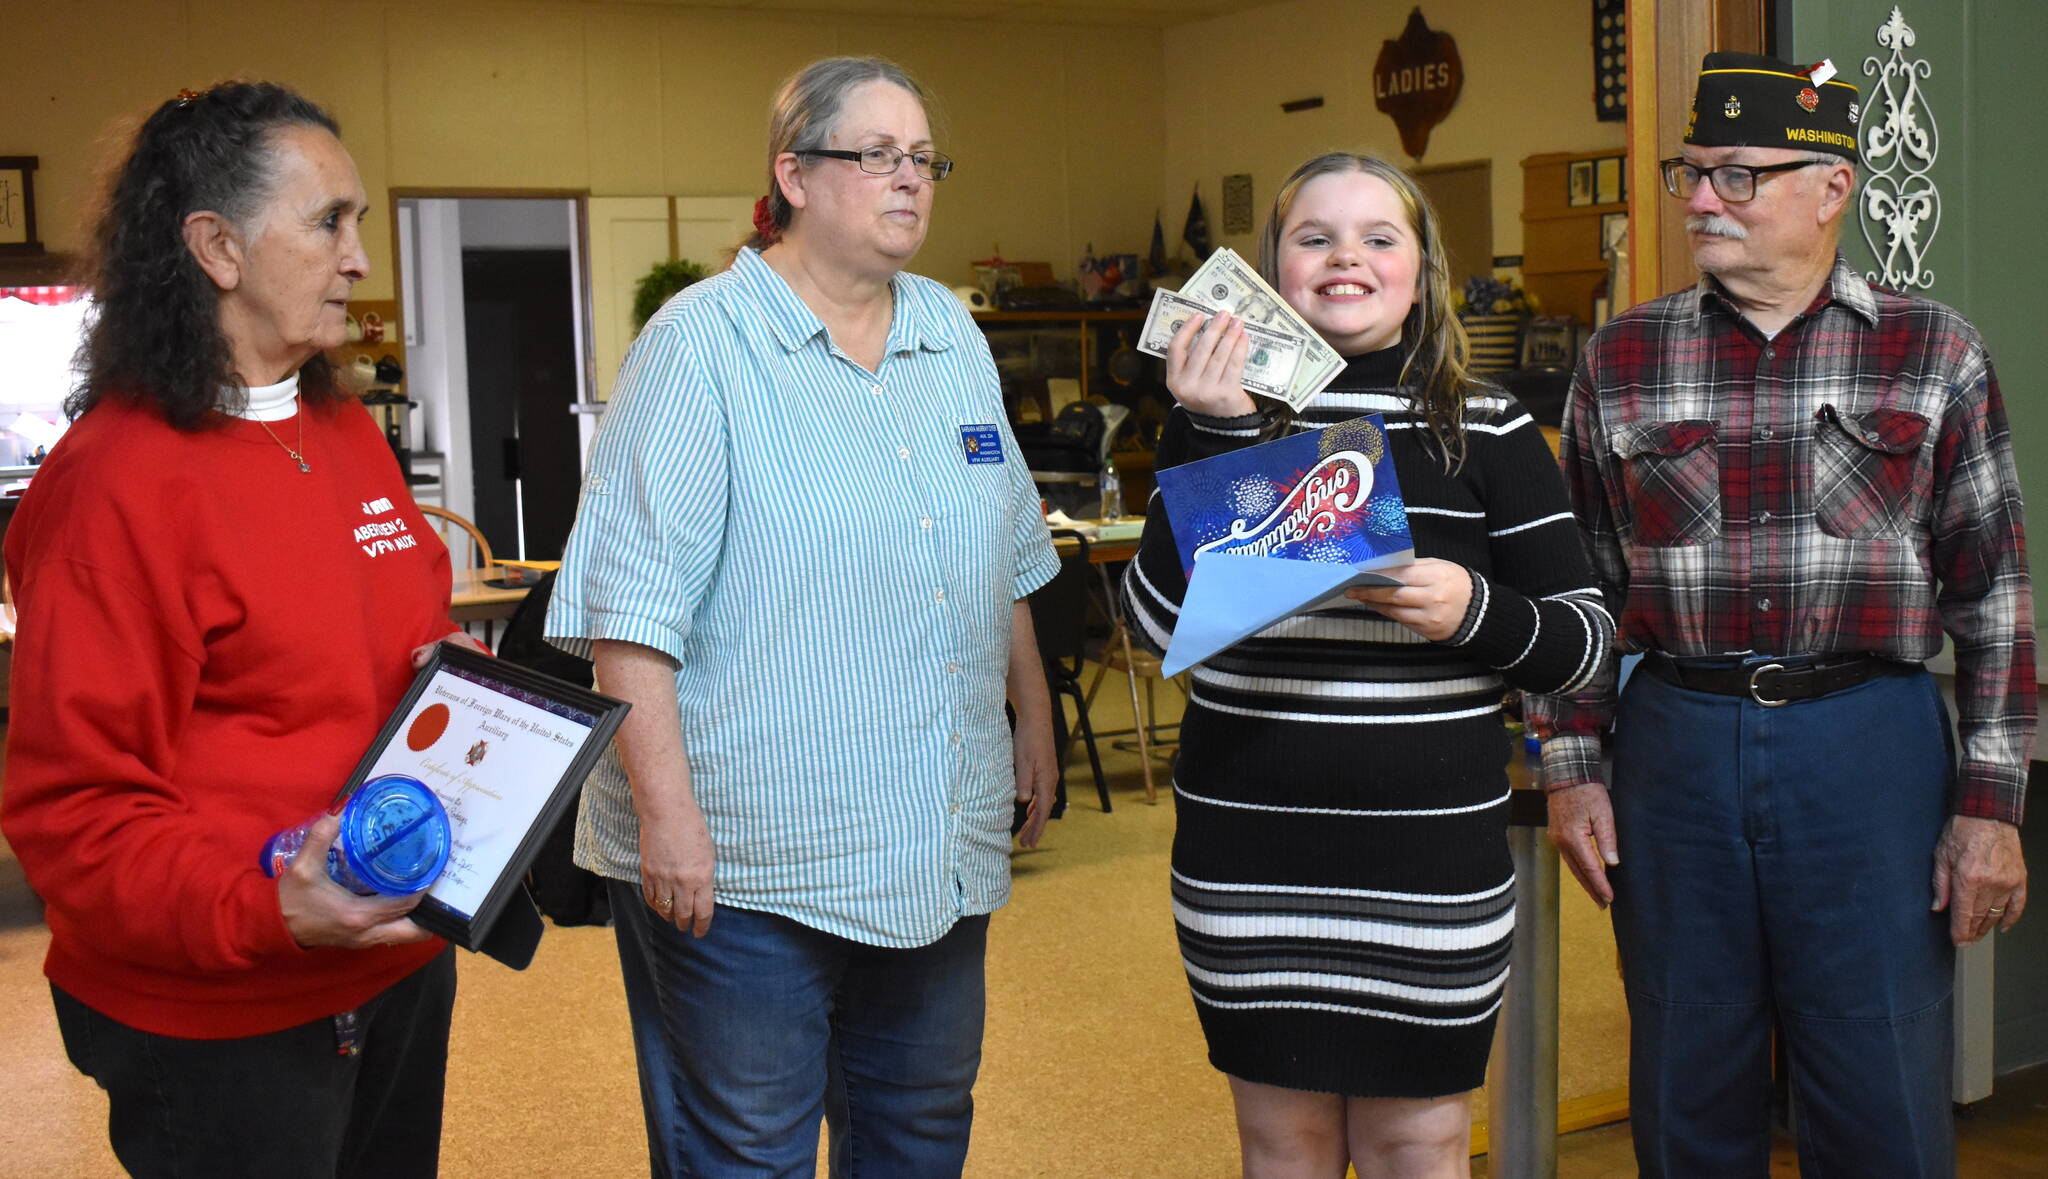 Matthew N. Wells / The Daily World
Pearl Robarge, second from right, glows after receiving her award of $75 in cash and a wood plaque from the VFW. Robarge, a fourth grader from McDermoth Elementary School, placed third in the VFW Red, White and Blue Scholarship Contest. The contest had nine singers — from kindergarten to 12th grade — from throughout Grays Harbor compete in singing “The Star Spangled Banner.” Jo Ann Briones Wadsworth, treasurer for VFW Post 224, far left, Barbara Dyer, president for VFW Post 224, left, and Anthony Magri, VFW 224’s post commander, helped present Pearl with her award on Tuesday night at American Legion Hall Post 5.